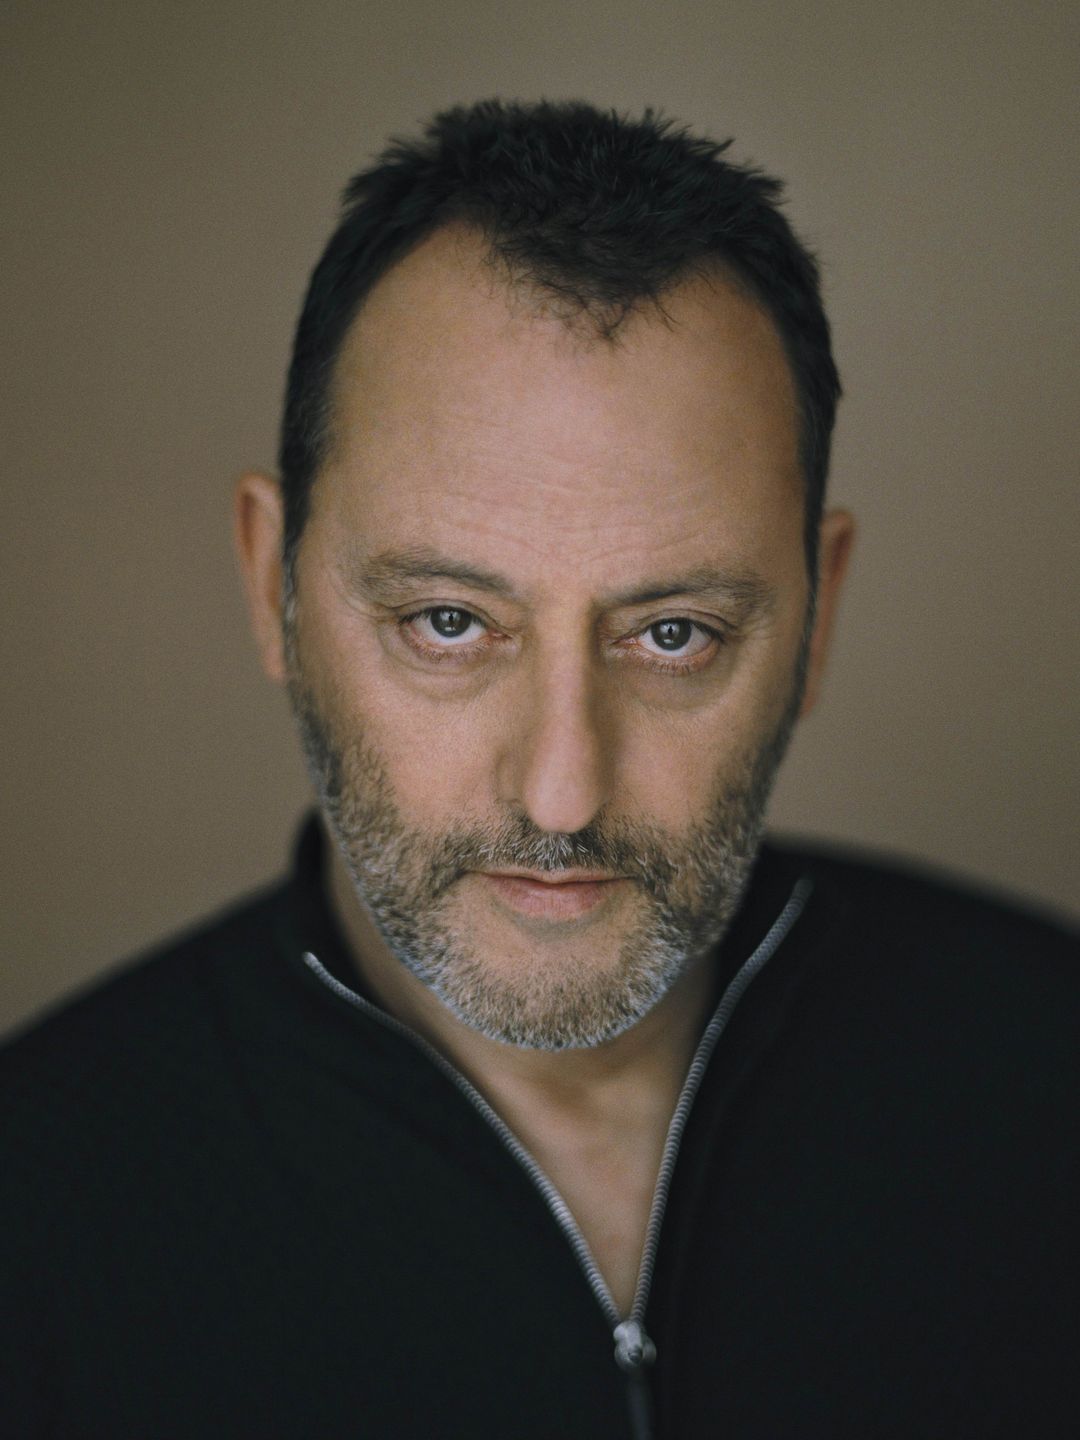 Jean Reno does he have kids